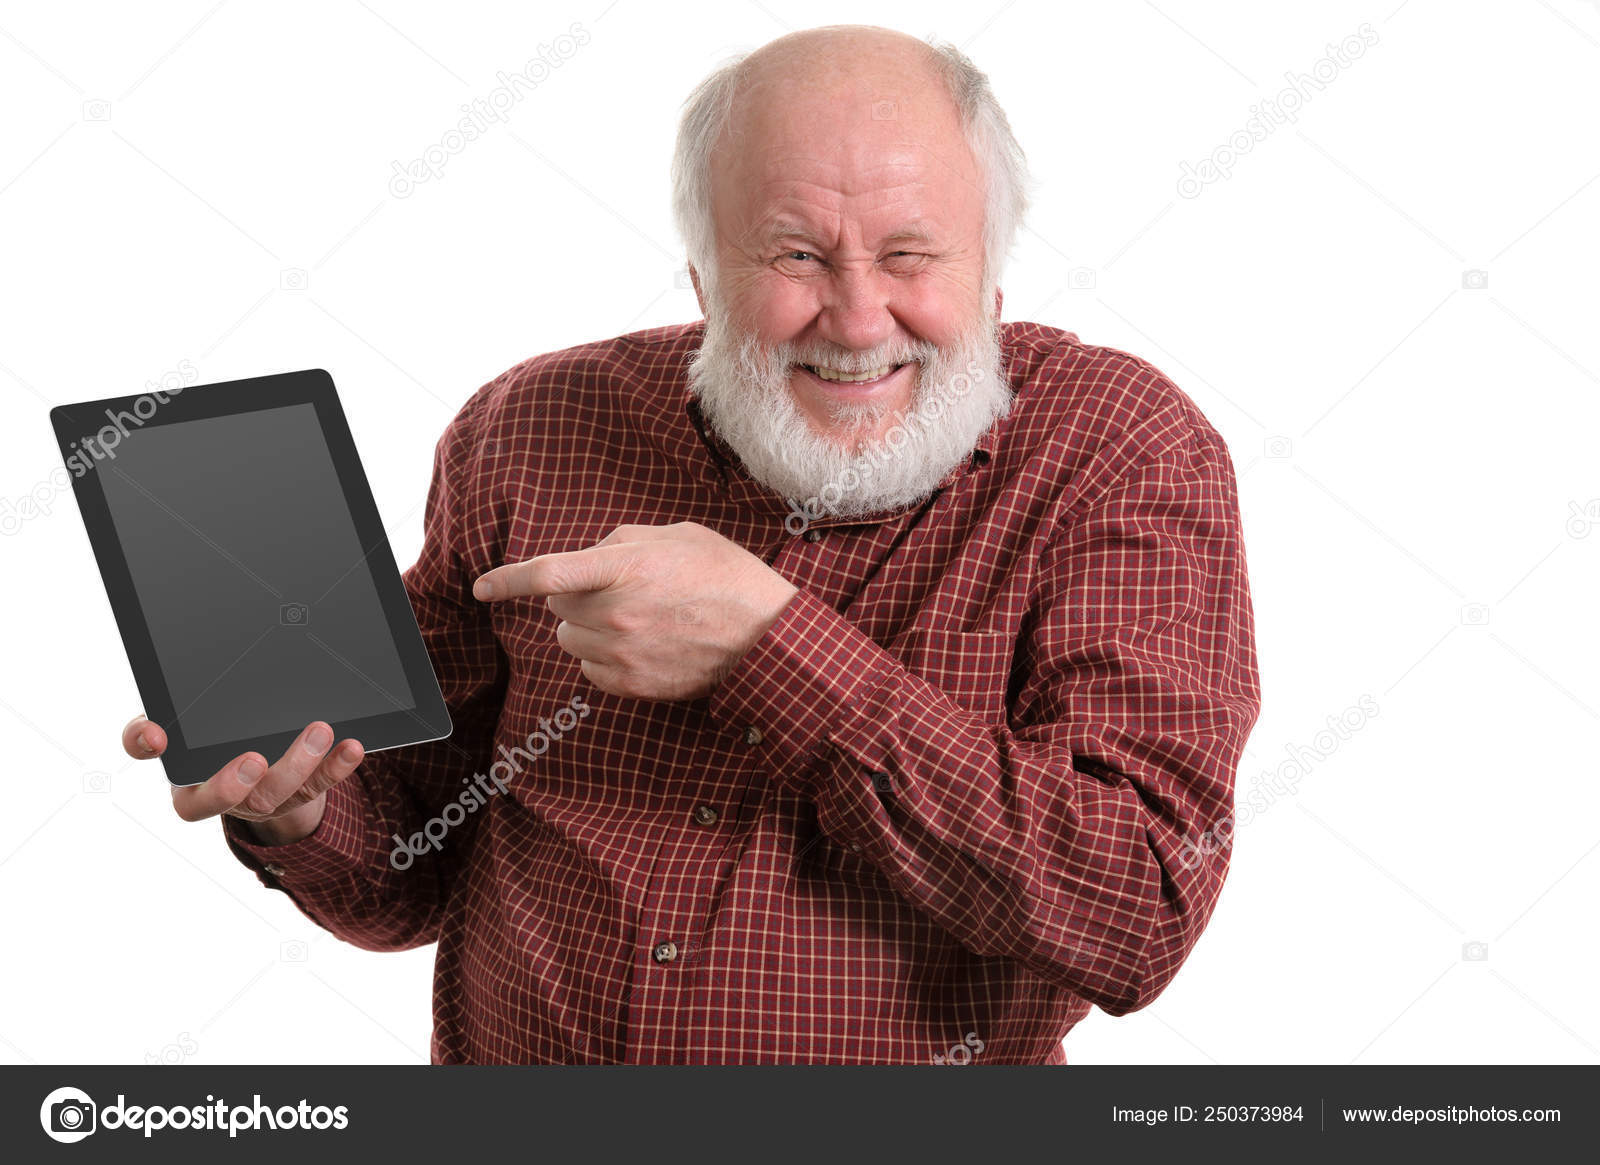 Funny old man Stock Photos, Royalty Free Funny old man Images |  Depositphotos